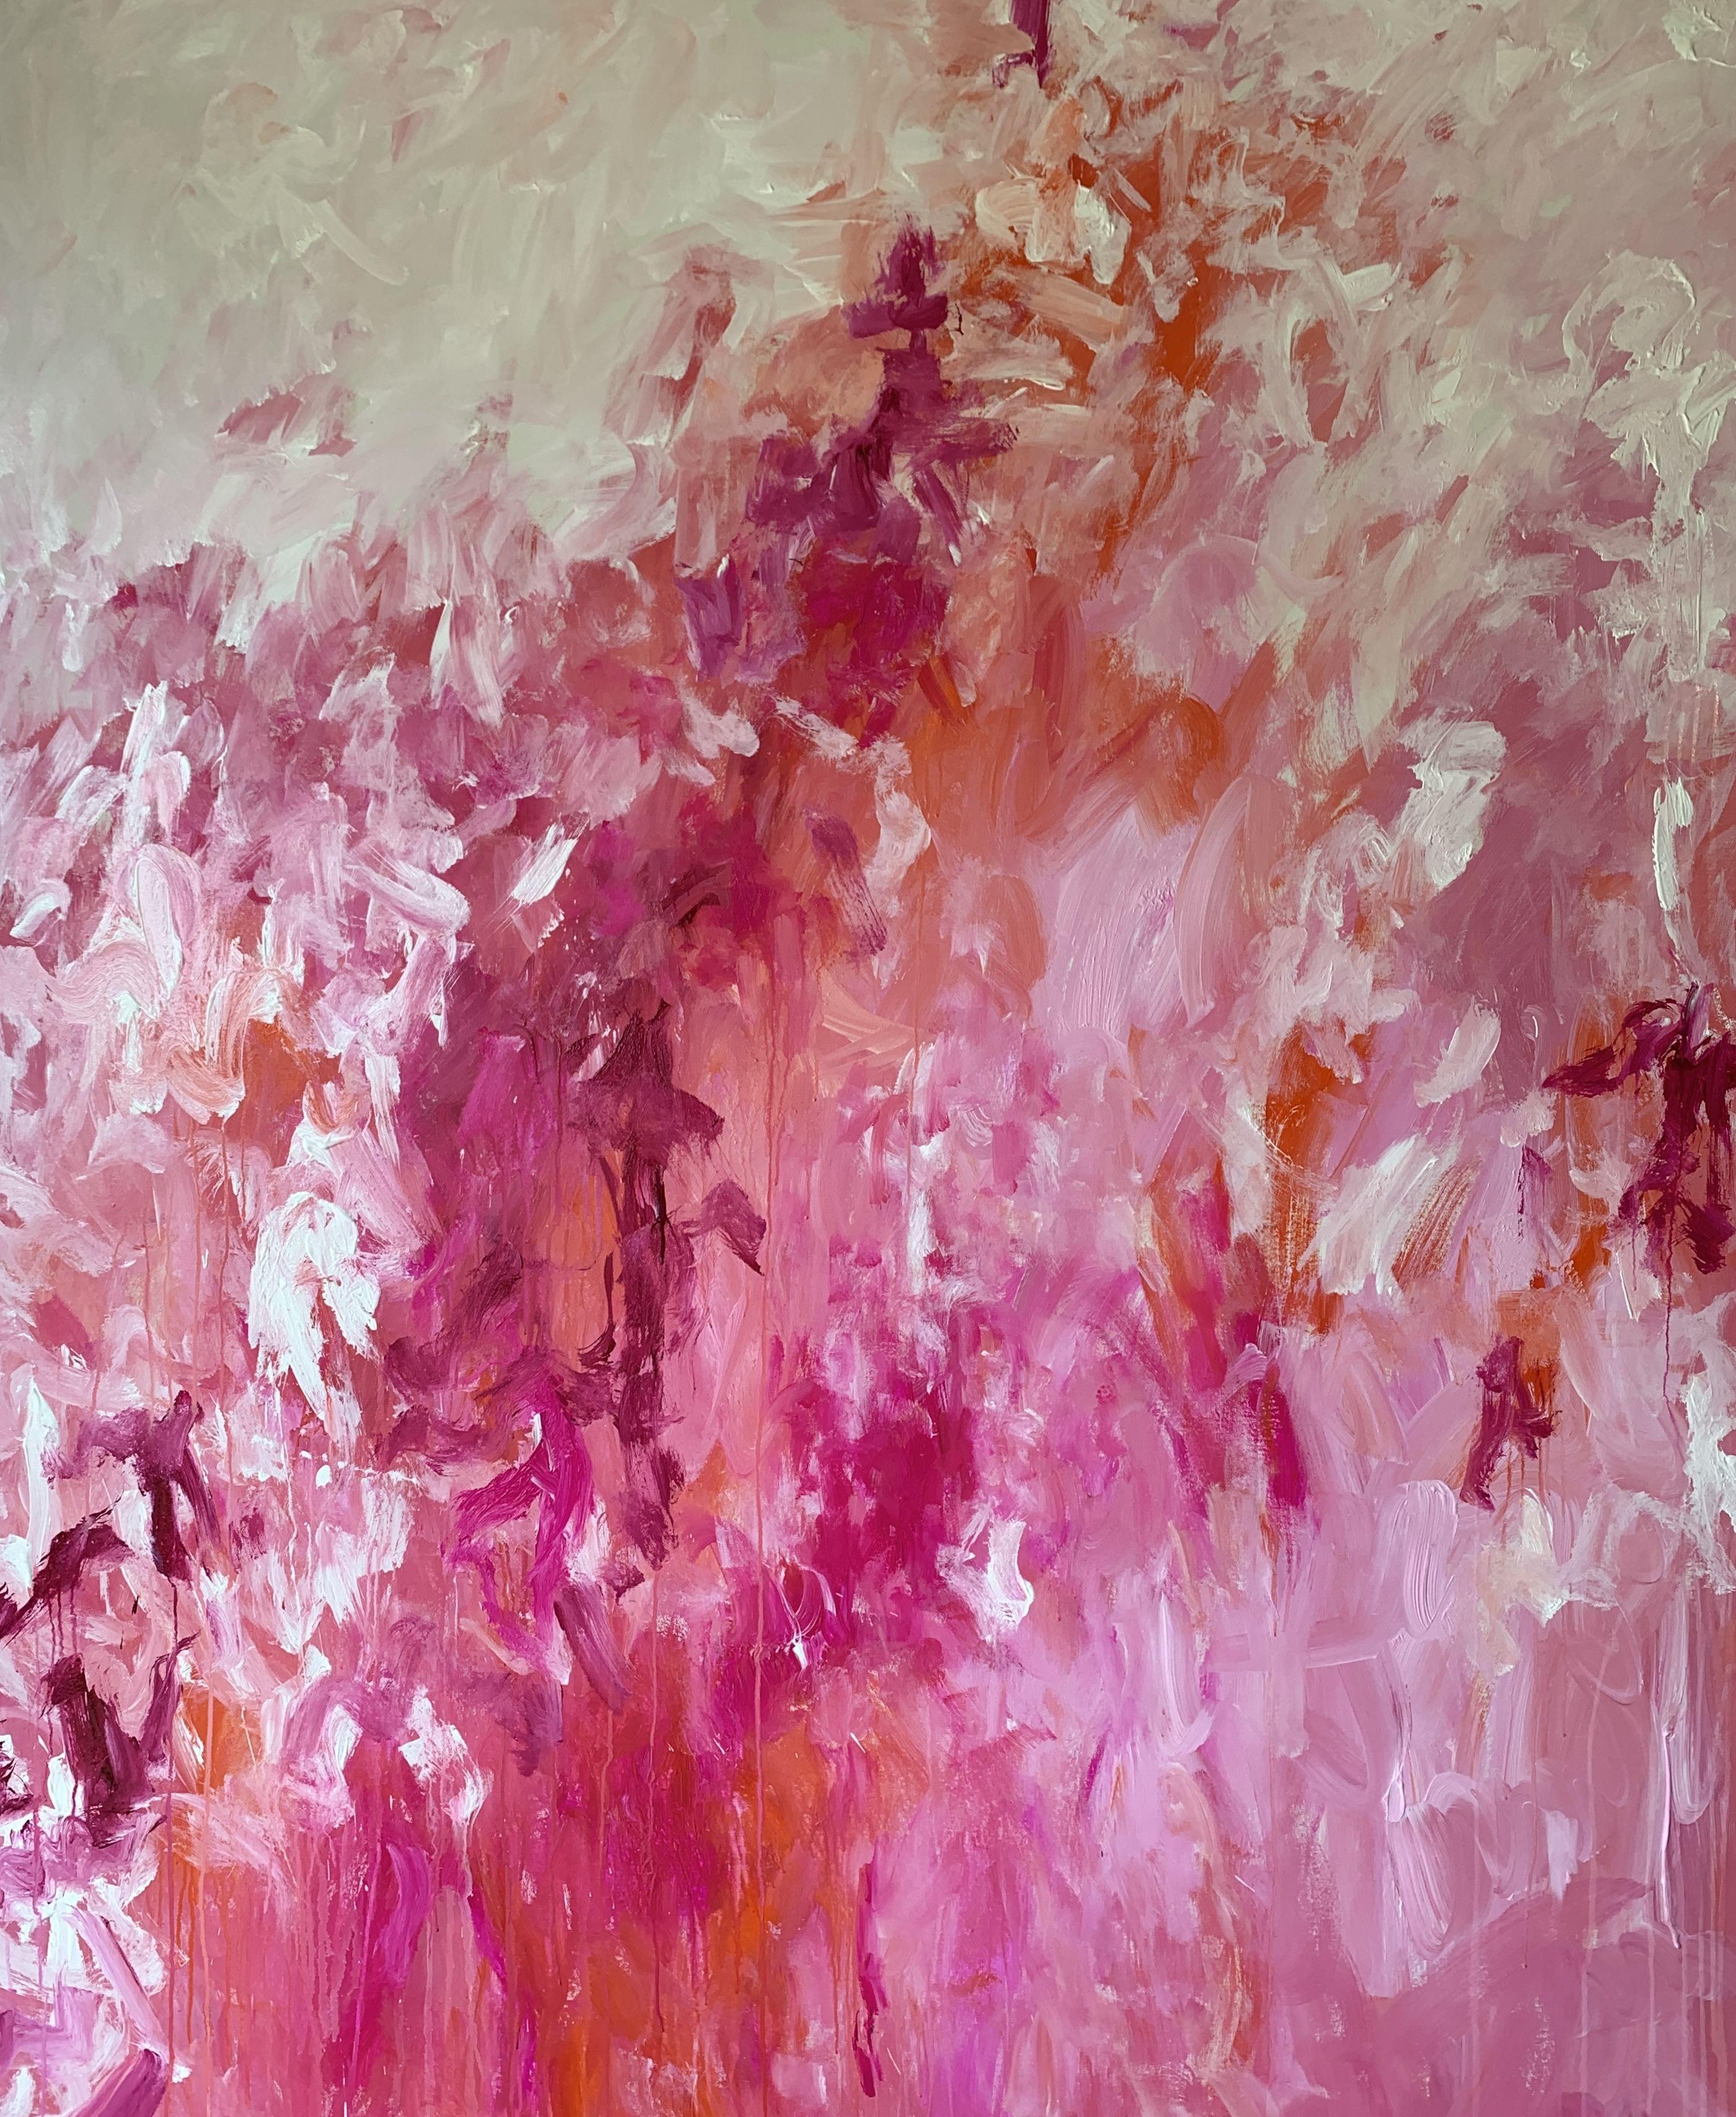 "Anticipation" is exclusively through Zatista with pinks, and white, magenta and orange gestural brushstrokes. Darlene loves to imagine and create with soft pinks in her florals and of course her impressionistic abstracts.  There is a great amount